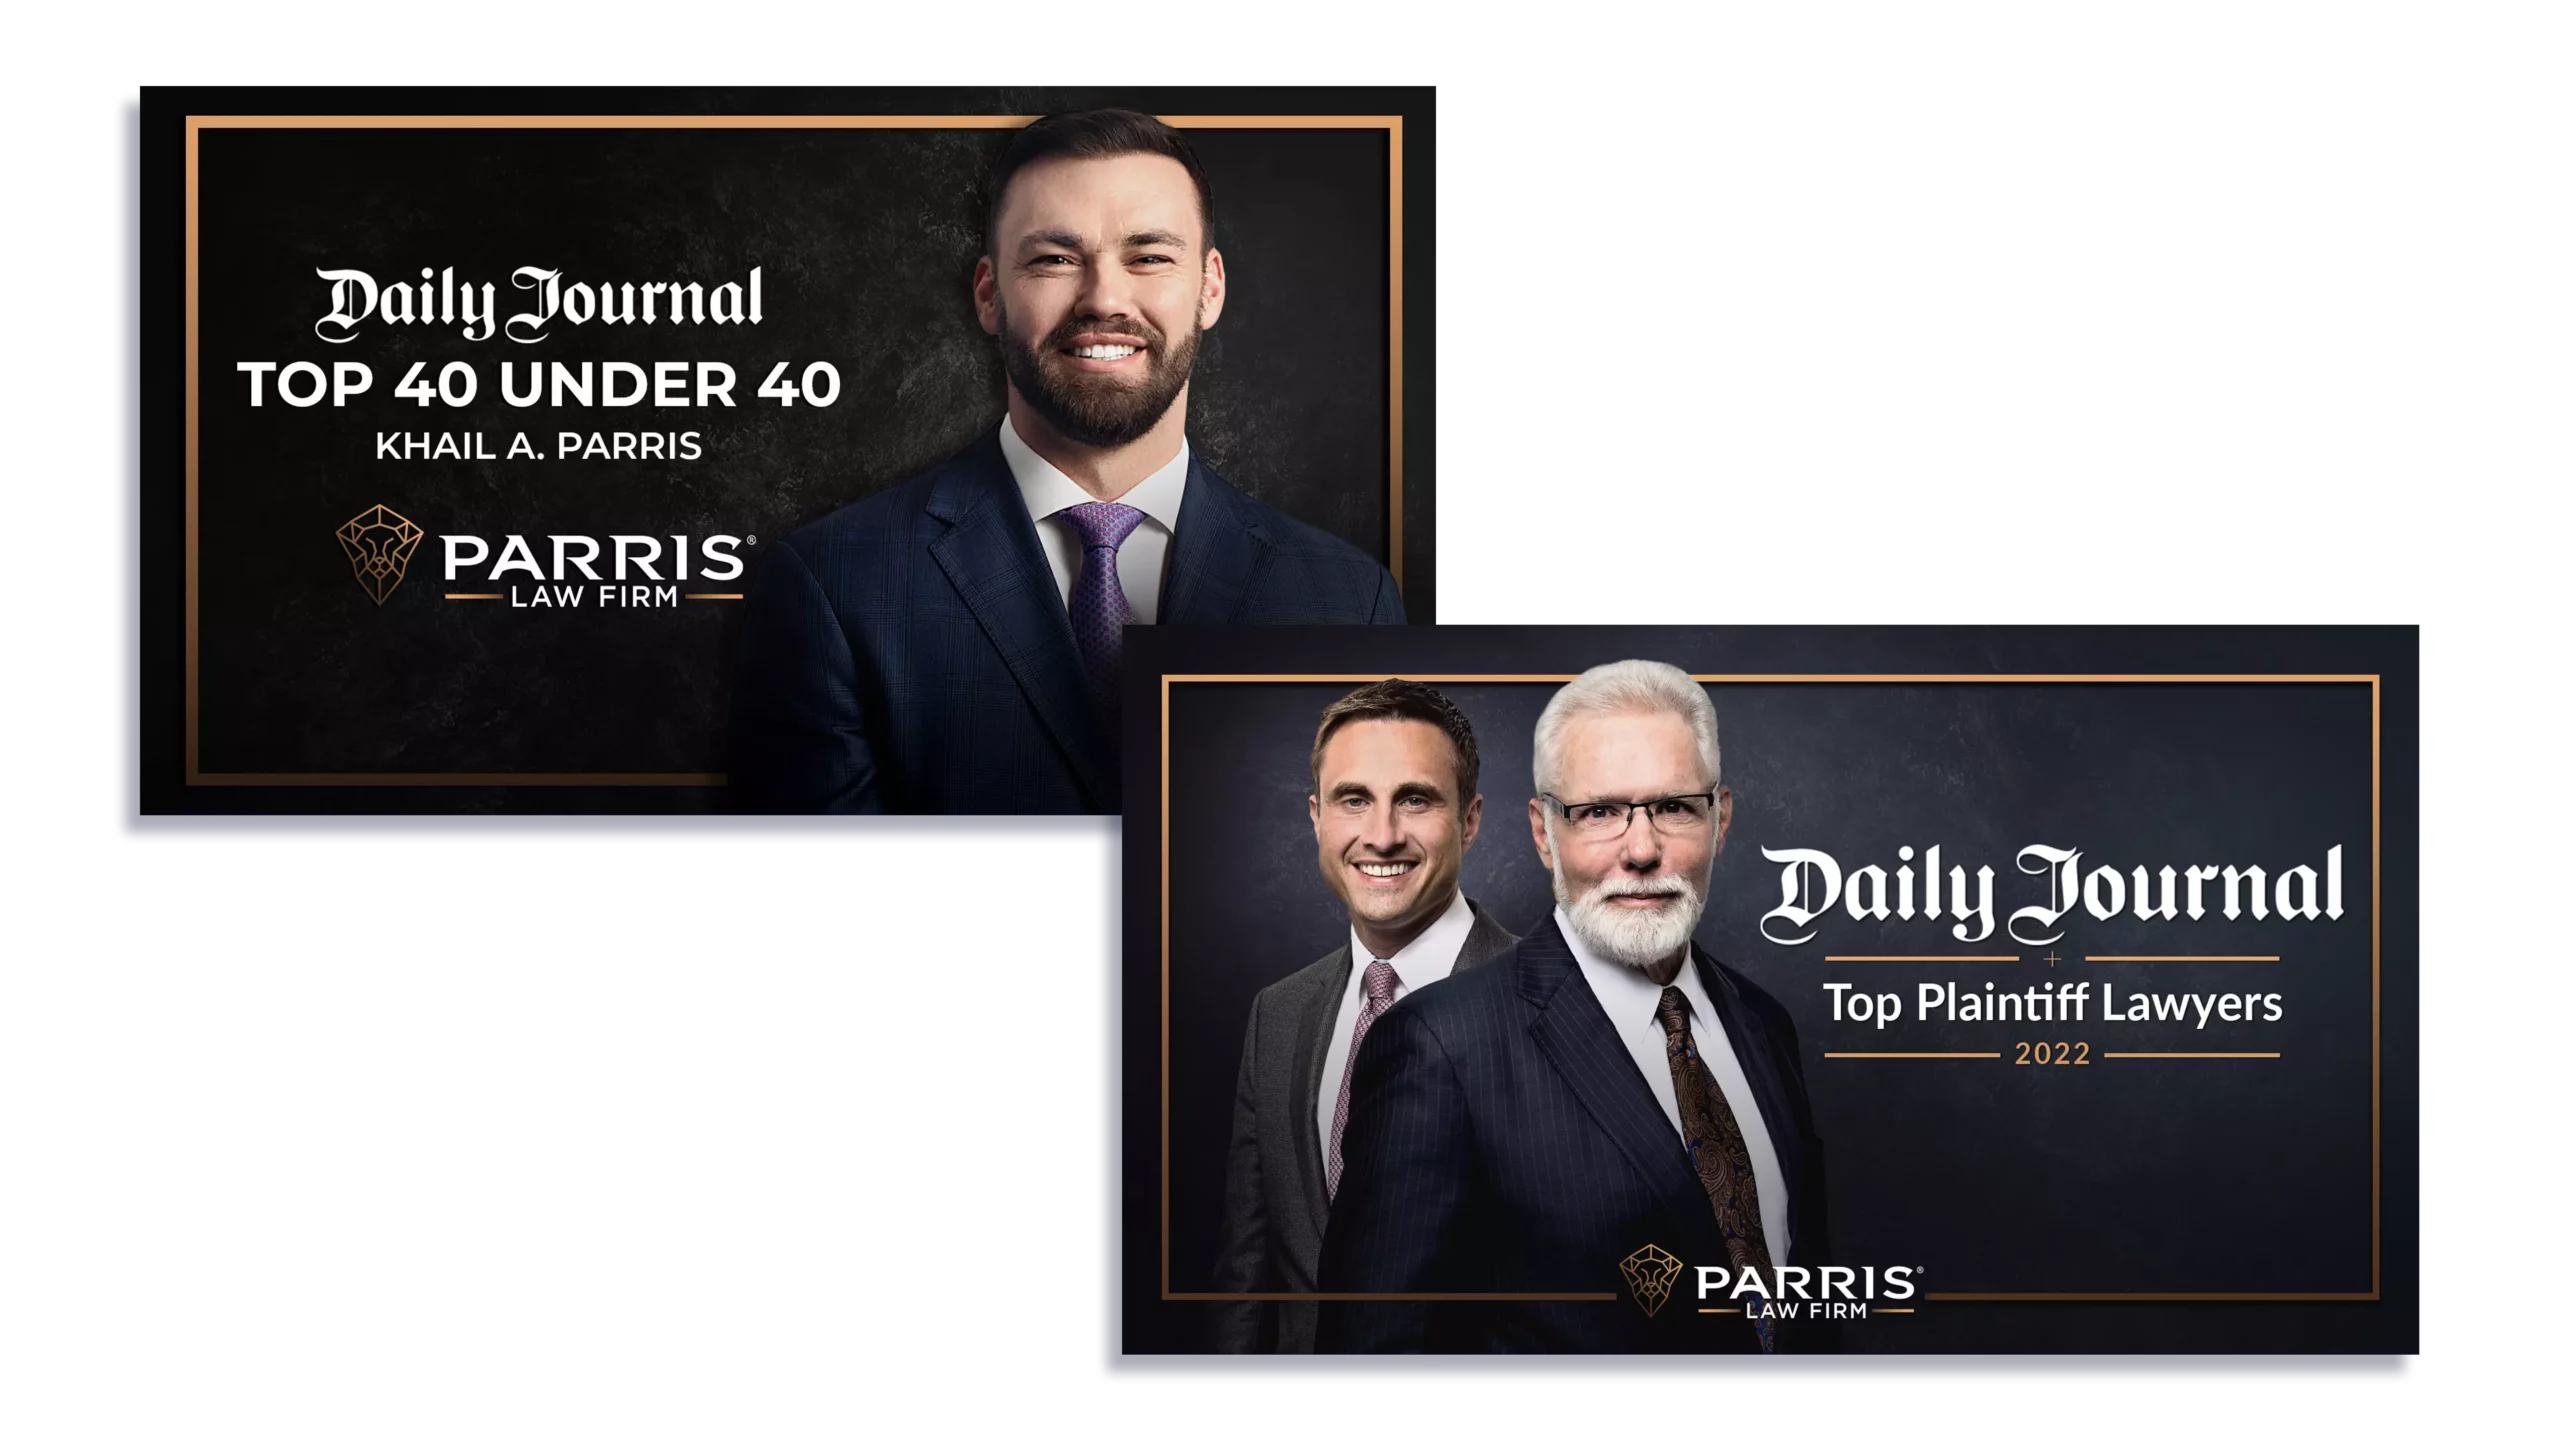 Parris Law Firm Banner's Continued Success